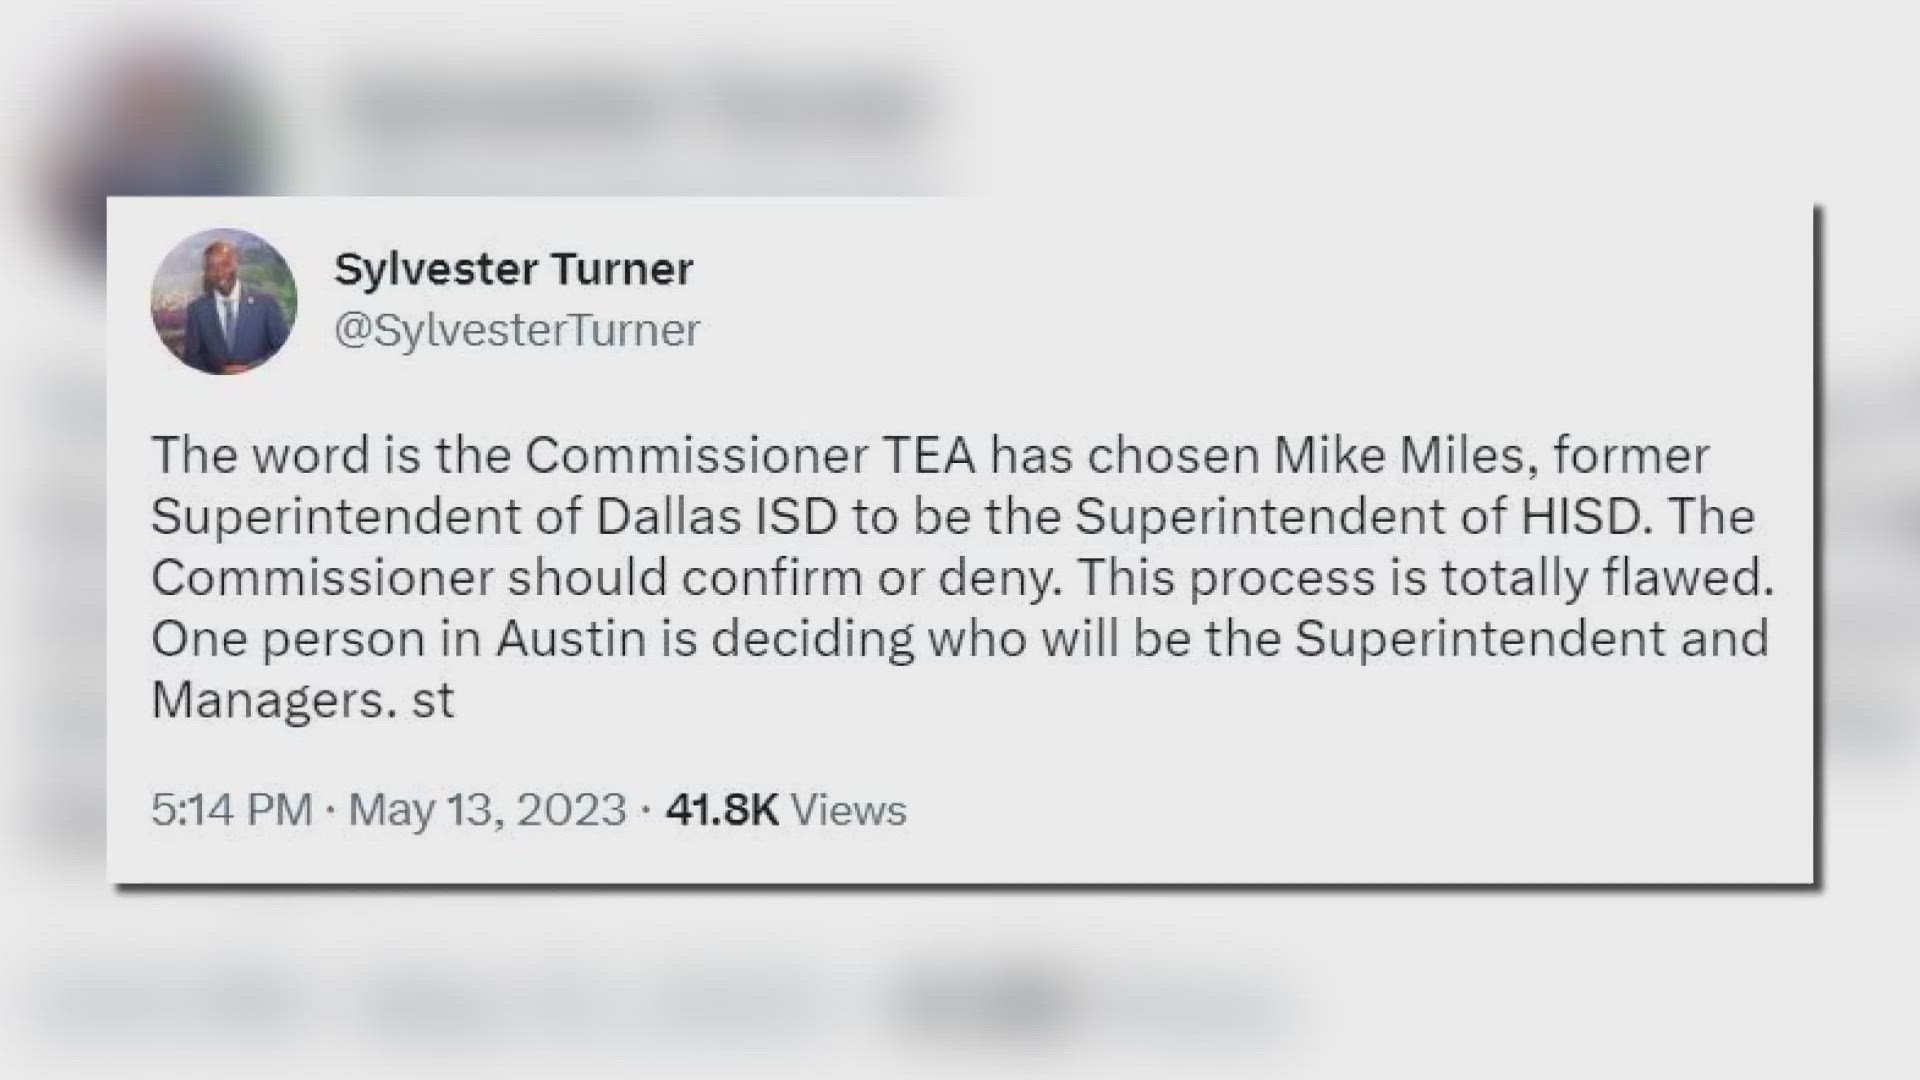 The Texas Education Agency denies the report, saying no decision has been made and that there will be no announcements before June 1.